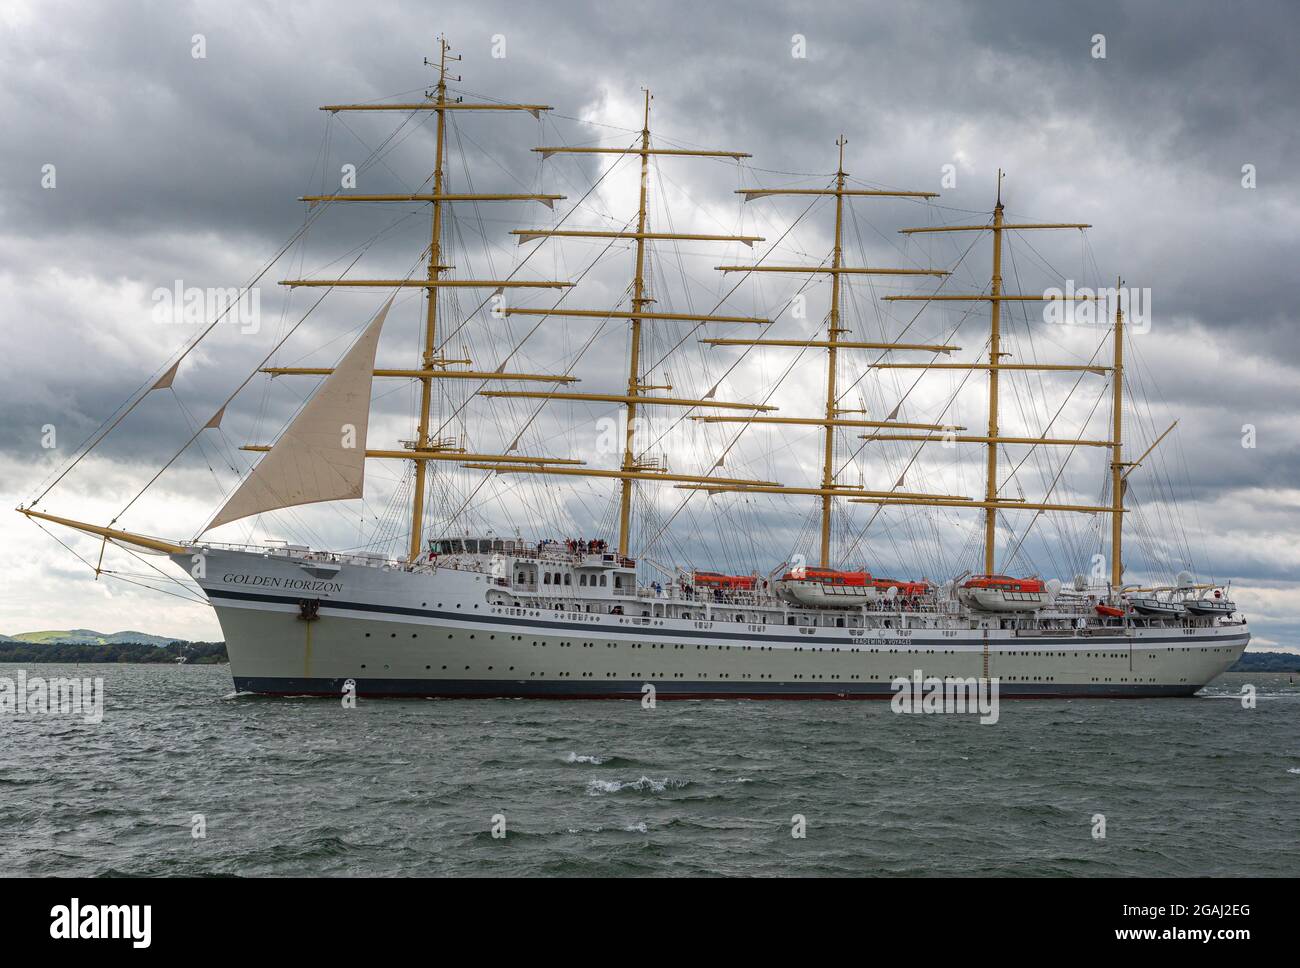 Poole Harbour  UK. 29th July 2021. SV Golden Horizon is a steel-hulled five-masted barque rigged tall ship which is intended to be used as a cruise Stock Photo